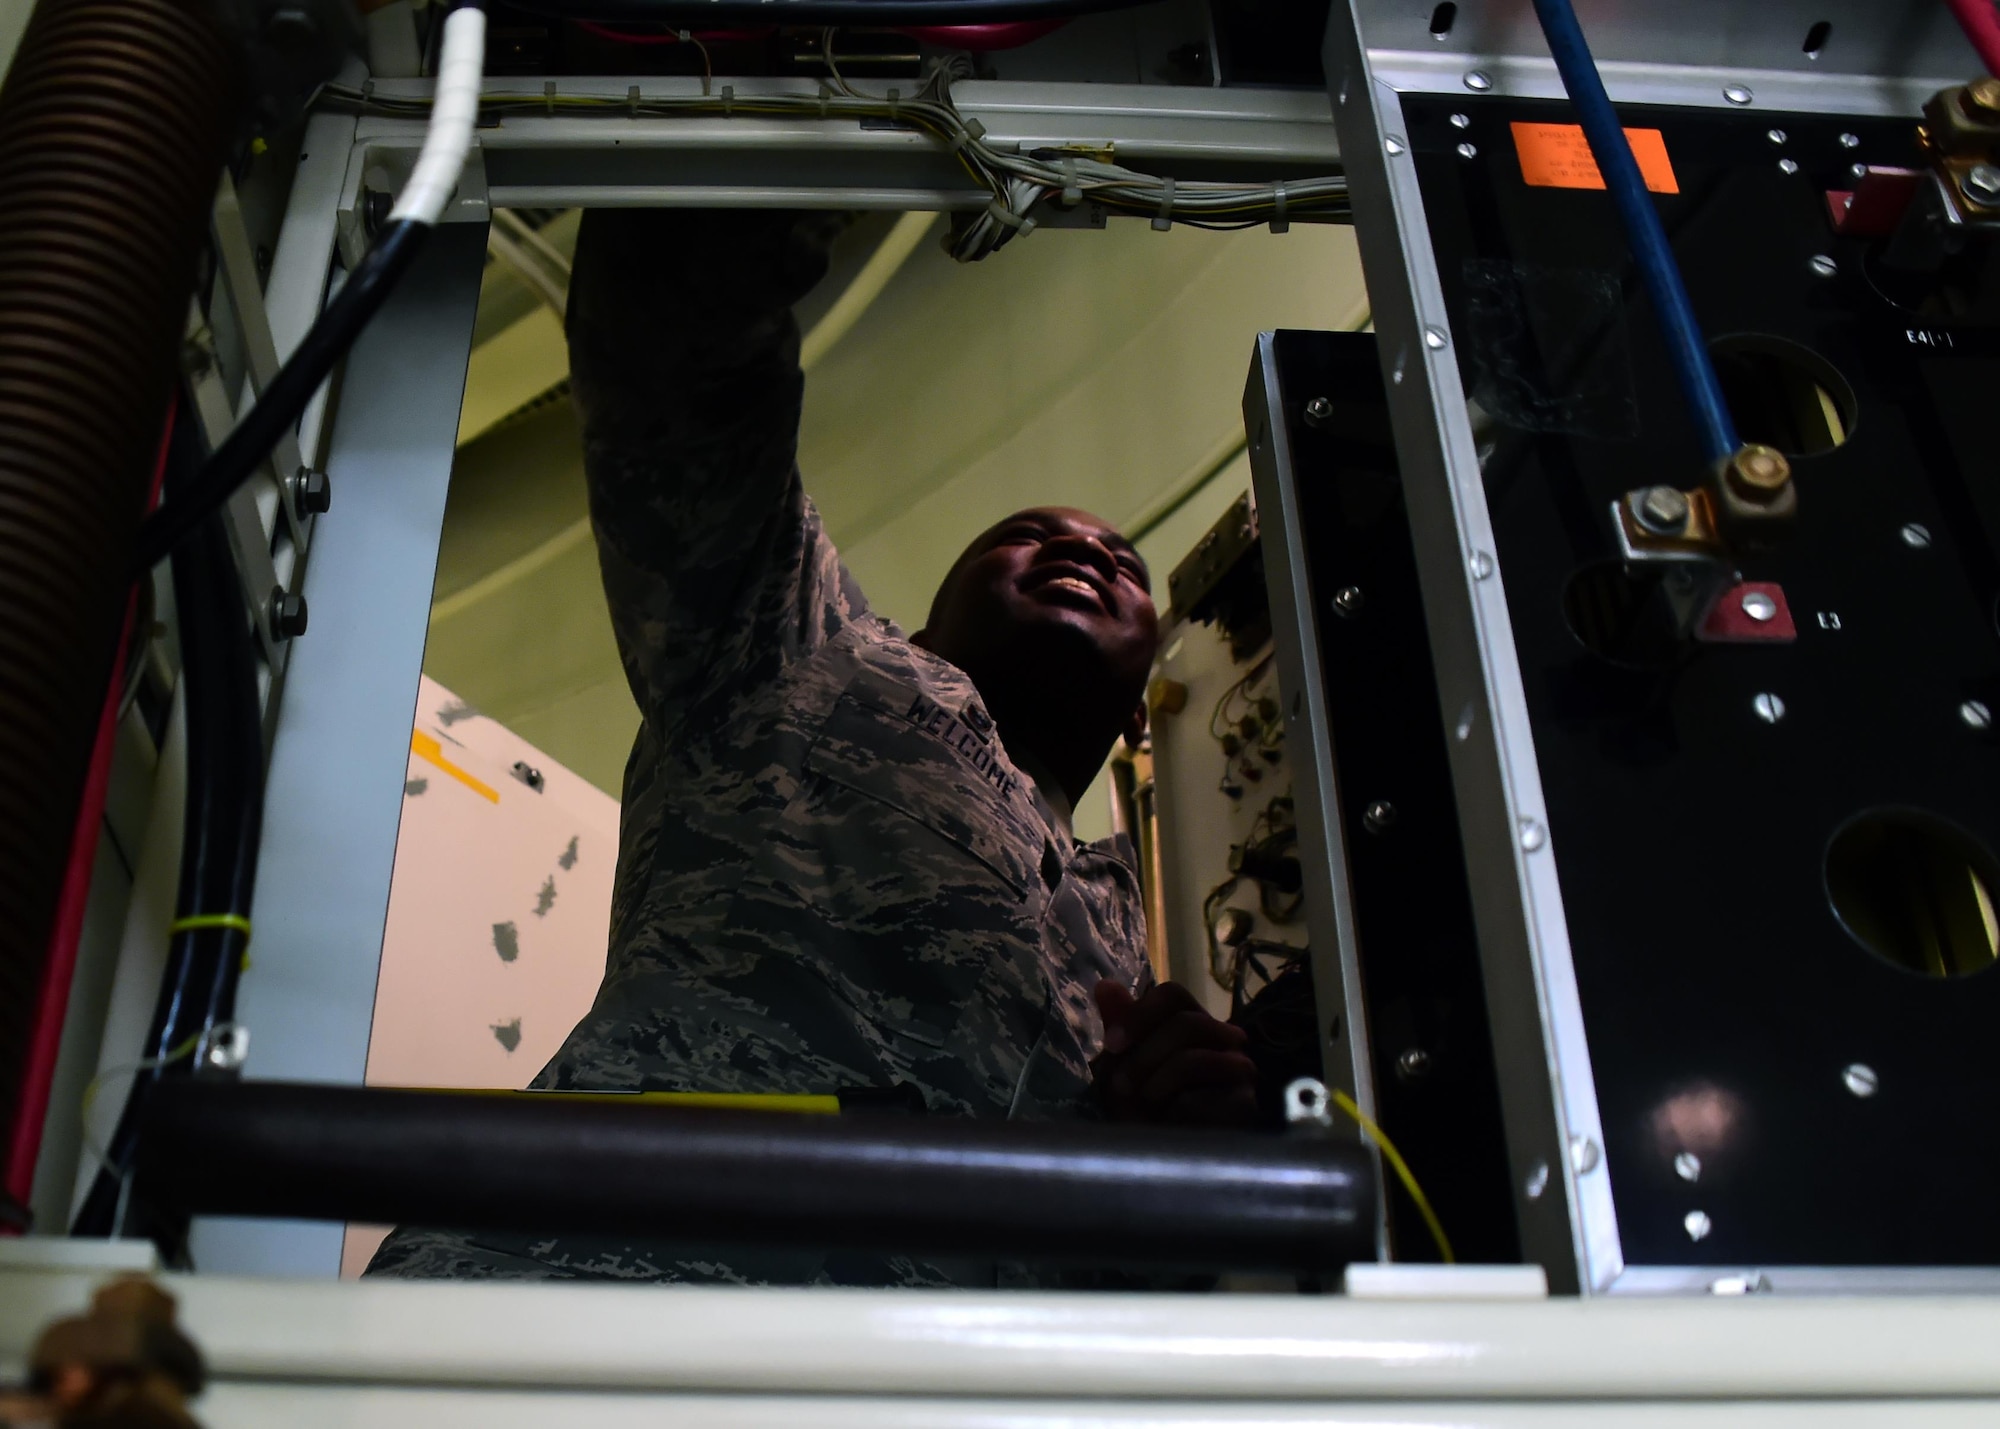 Lt. Col. Eric Welcome, 460th Space Communication Squadron commander, learns how to properly clean one of the power supply towers inside one of the radomes Oct. 20. 2016, on Buckley Air Force Base, Colo. Due to the importance of the radomes, Airmen within the 460th SCS walked Welcome through their weekly maintenance routine to insure operation readiness. (U.S. Air Force photo by Airman Holden S. Faul/ Released)